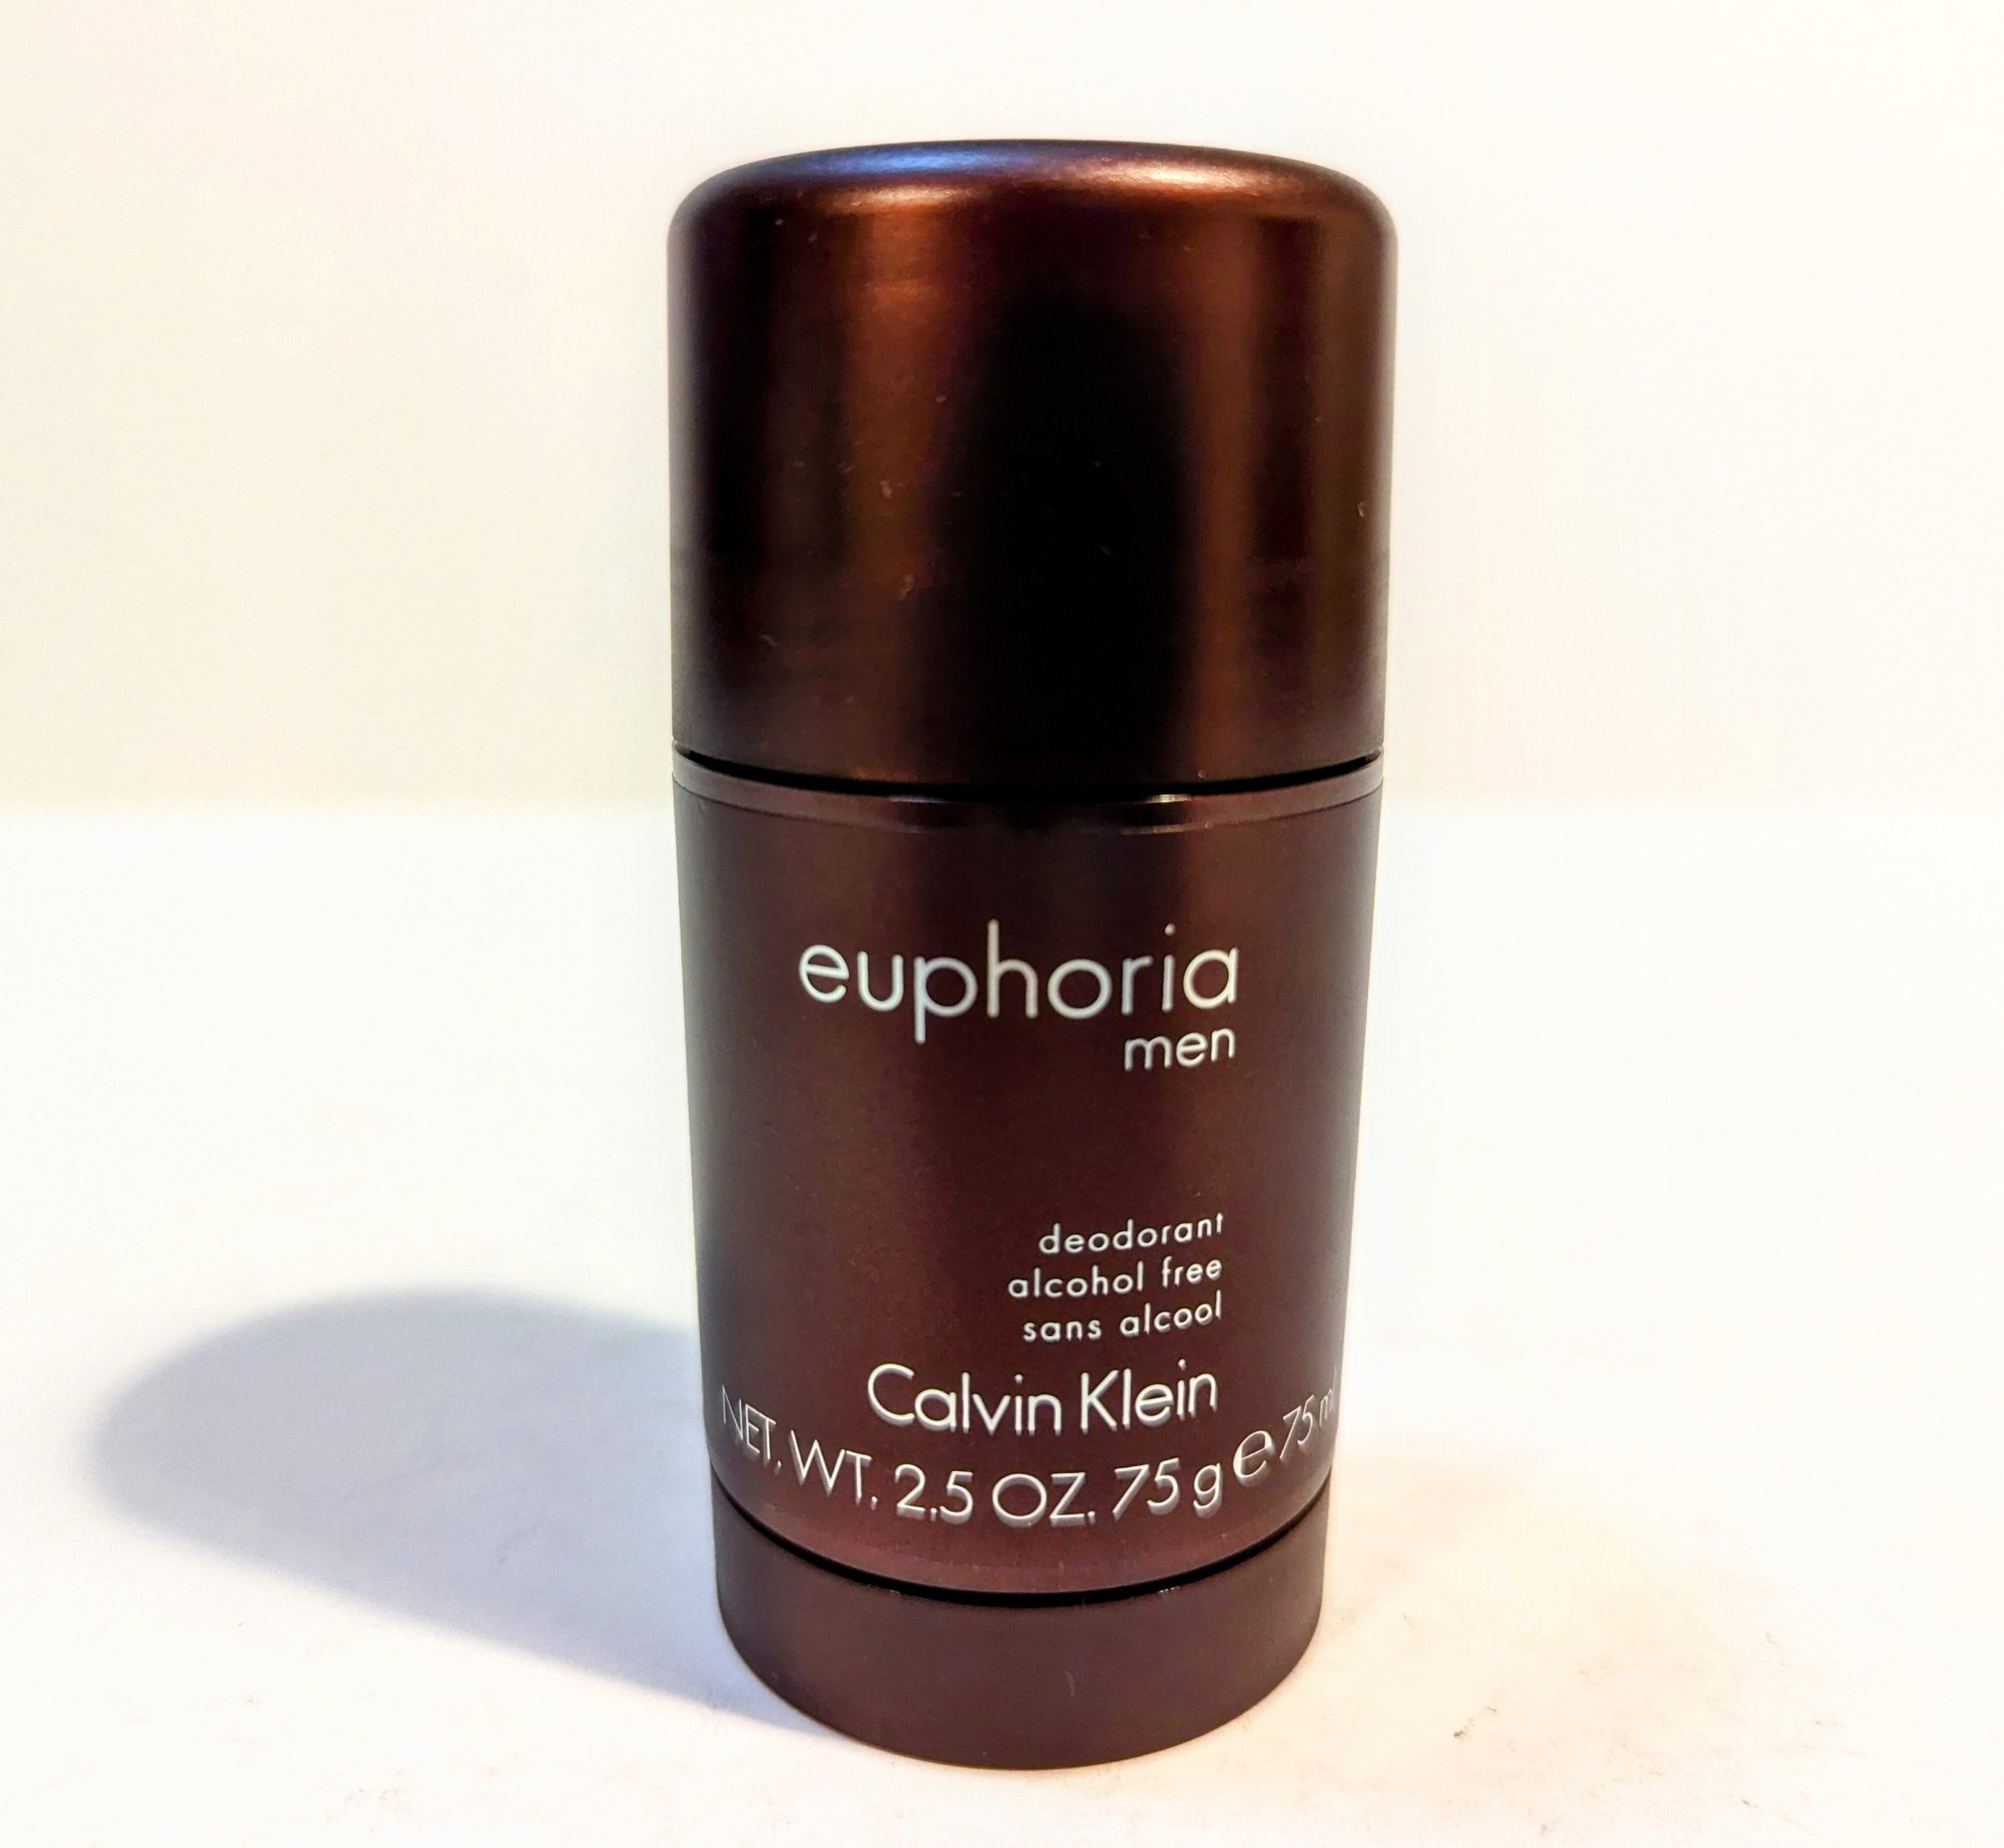 A brown cylindrical deodorant stick labeled “euphoria men” by Calvin Klein, highlighting its alcohol-free formulation and 2.5 oz weight.